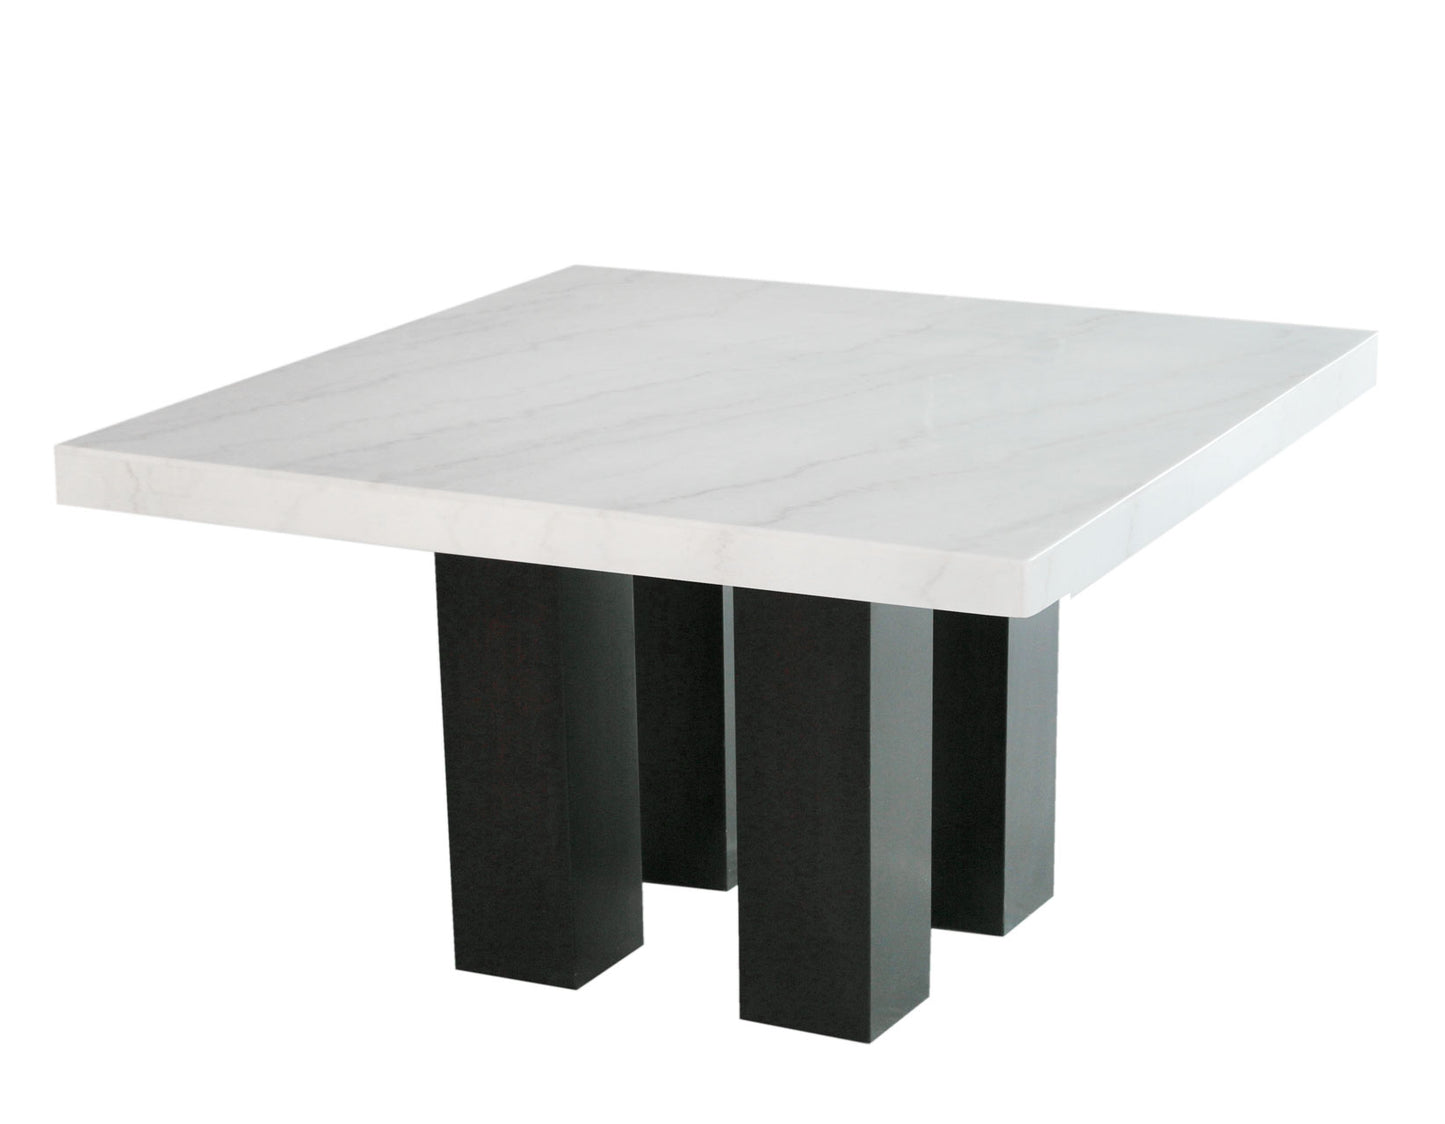 Camila 54 inch Square White Marble Top Dining Table